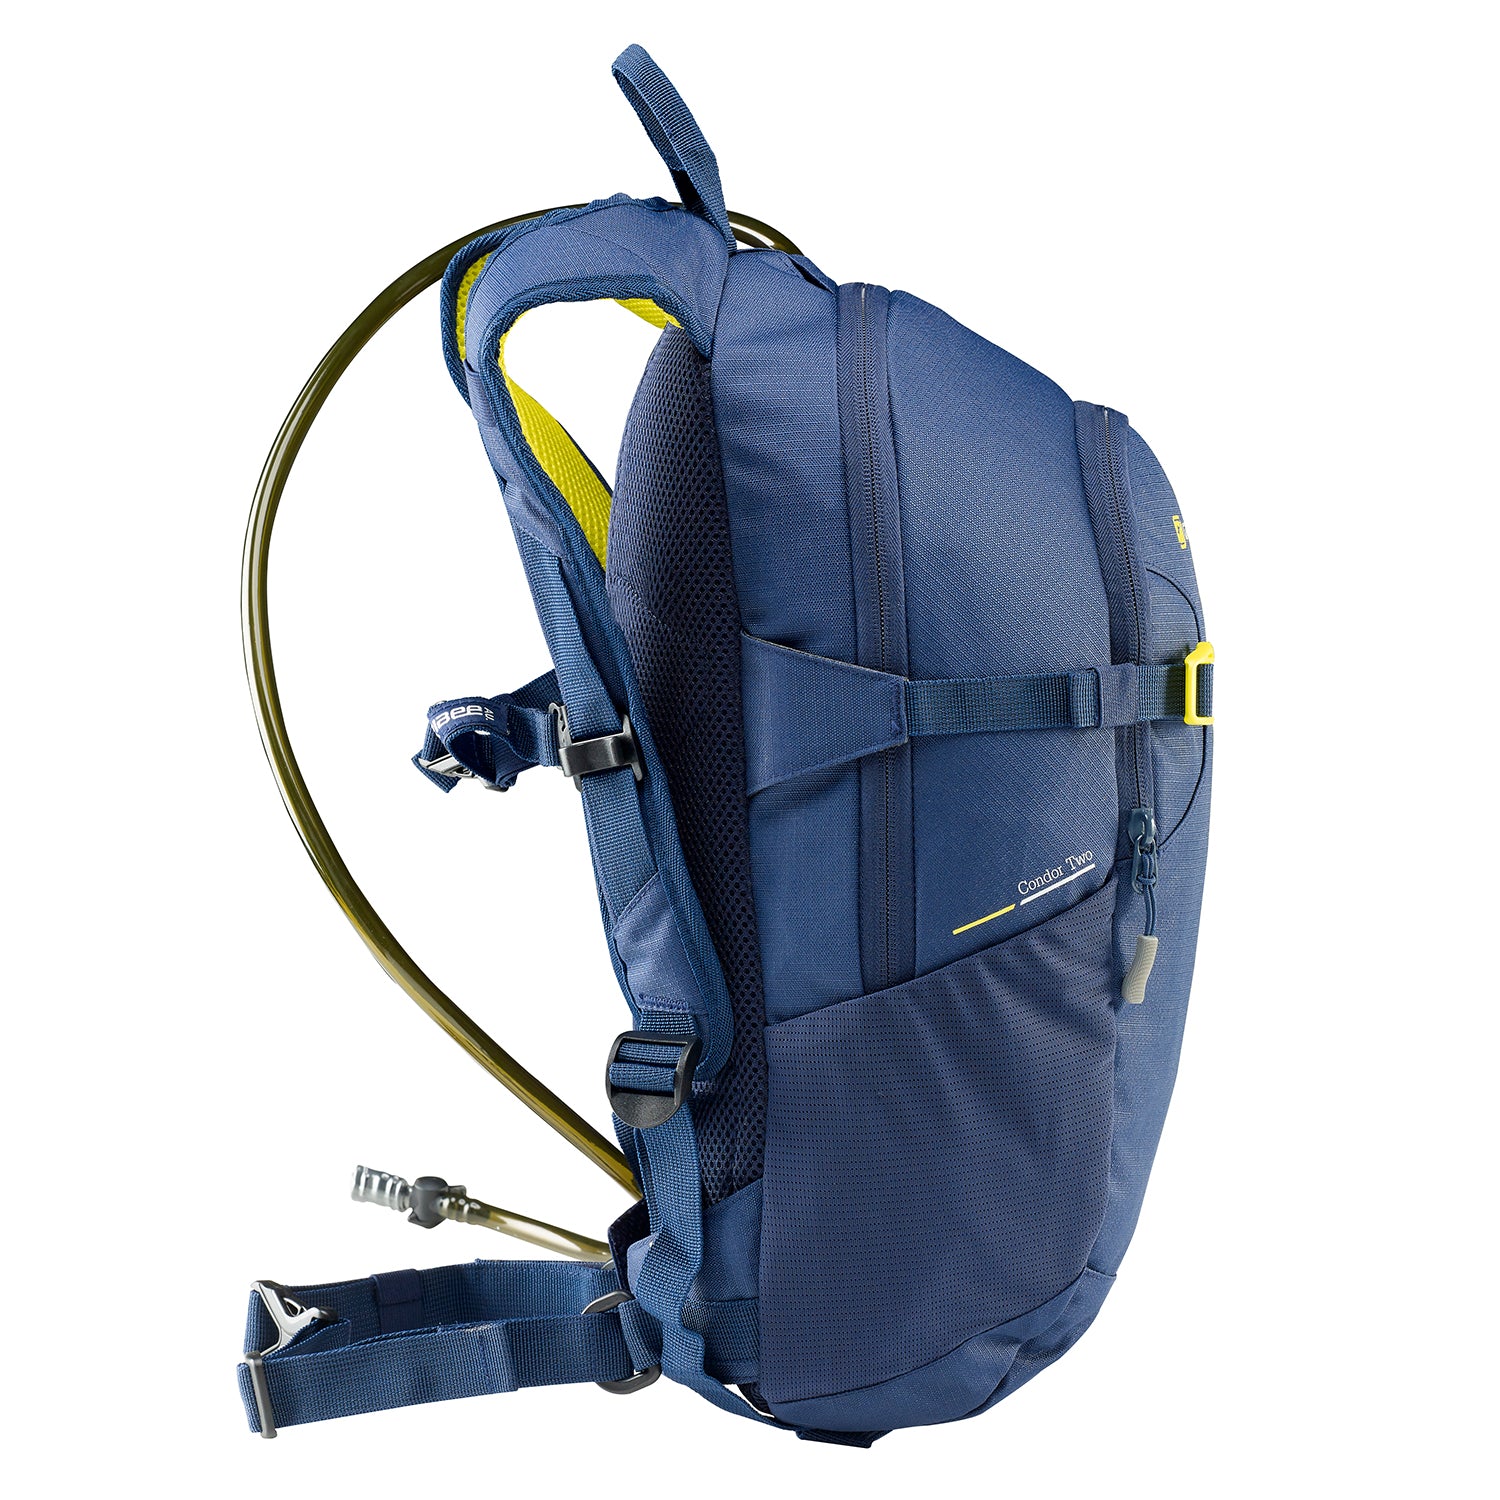 Caribee Condor Two 2L Hydration backpack in Ink Blue - side